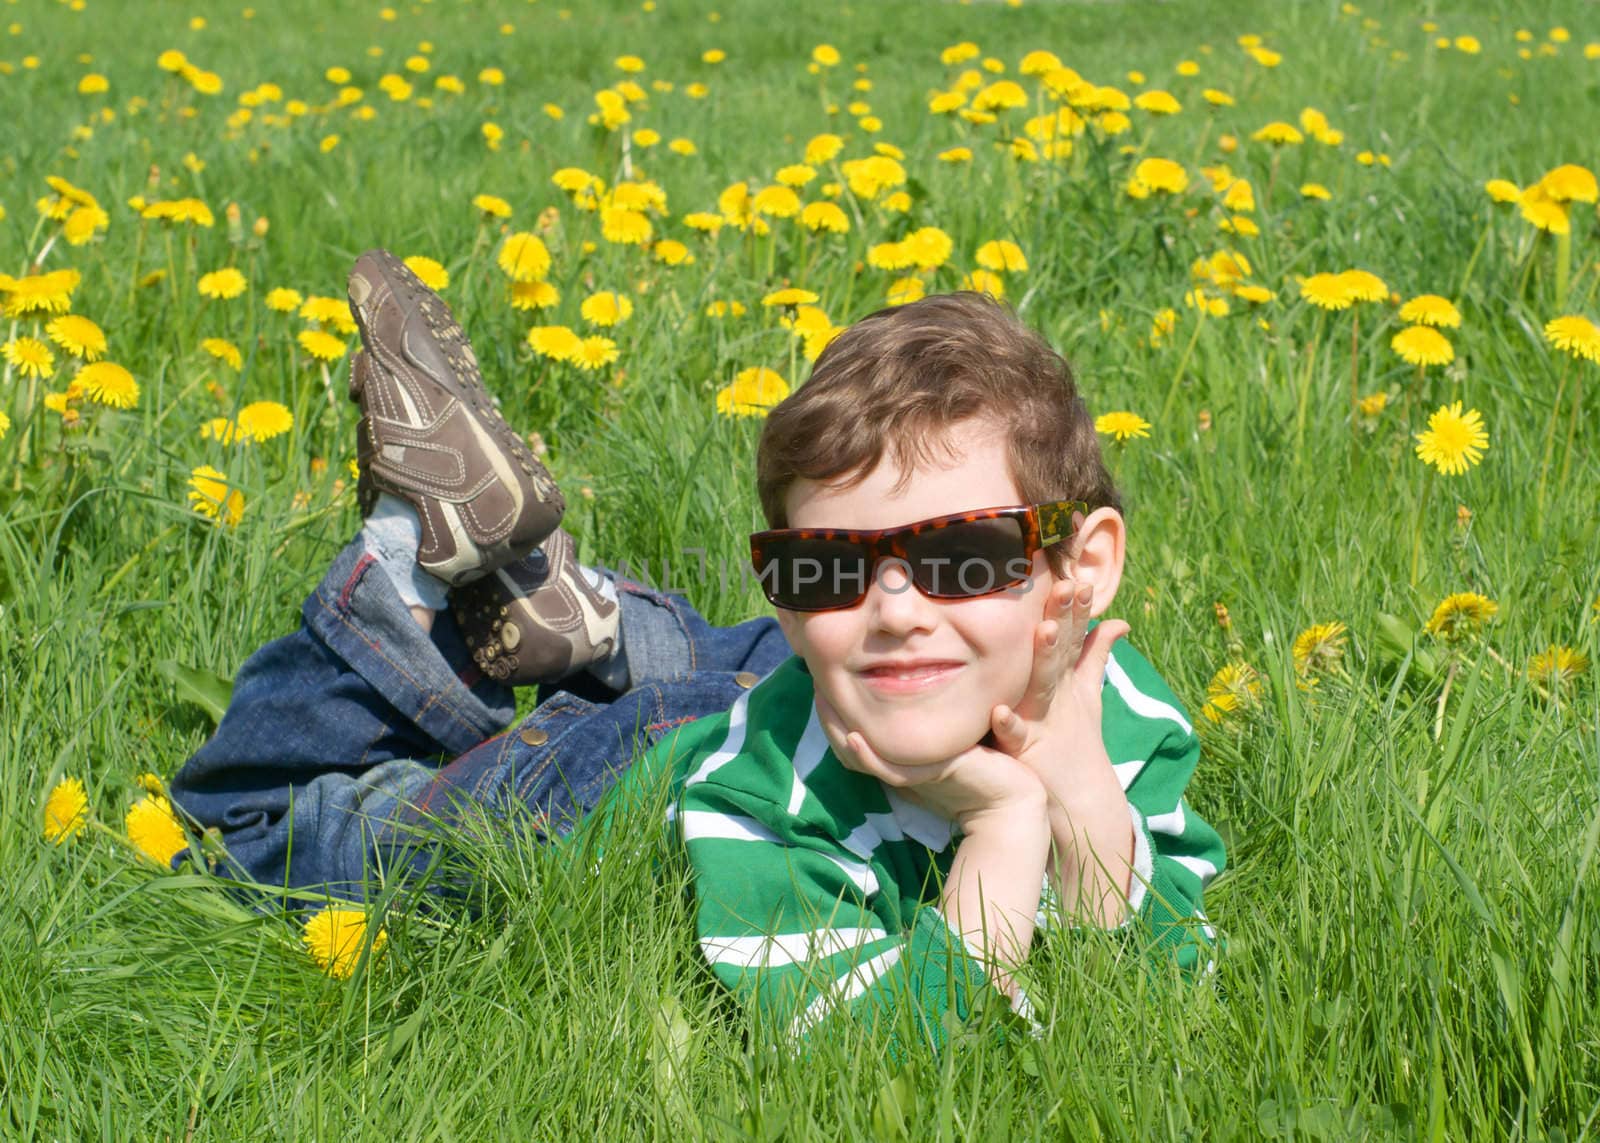 The boy is on the grass with dandelions by BIG_TAU